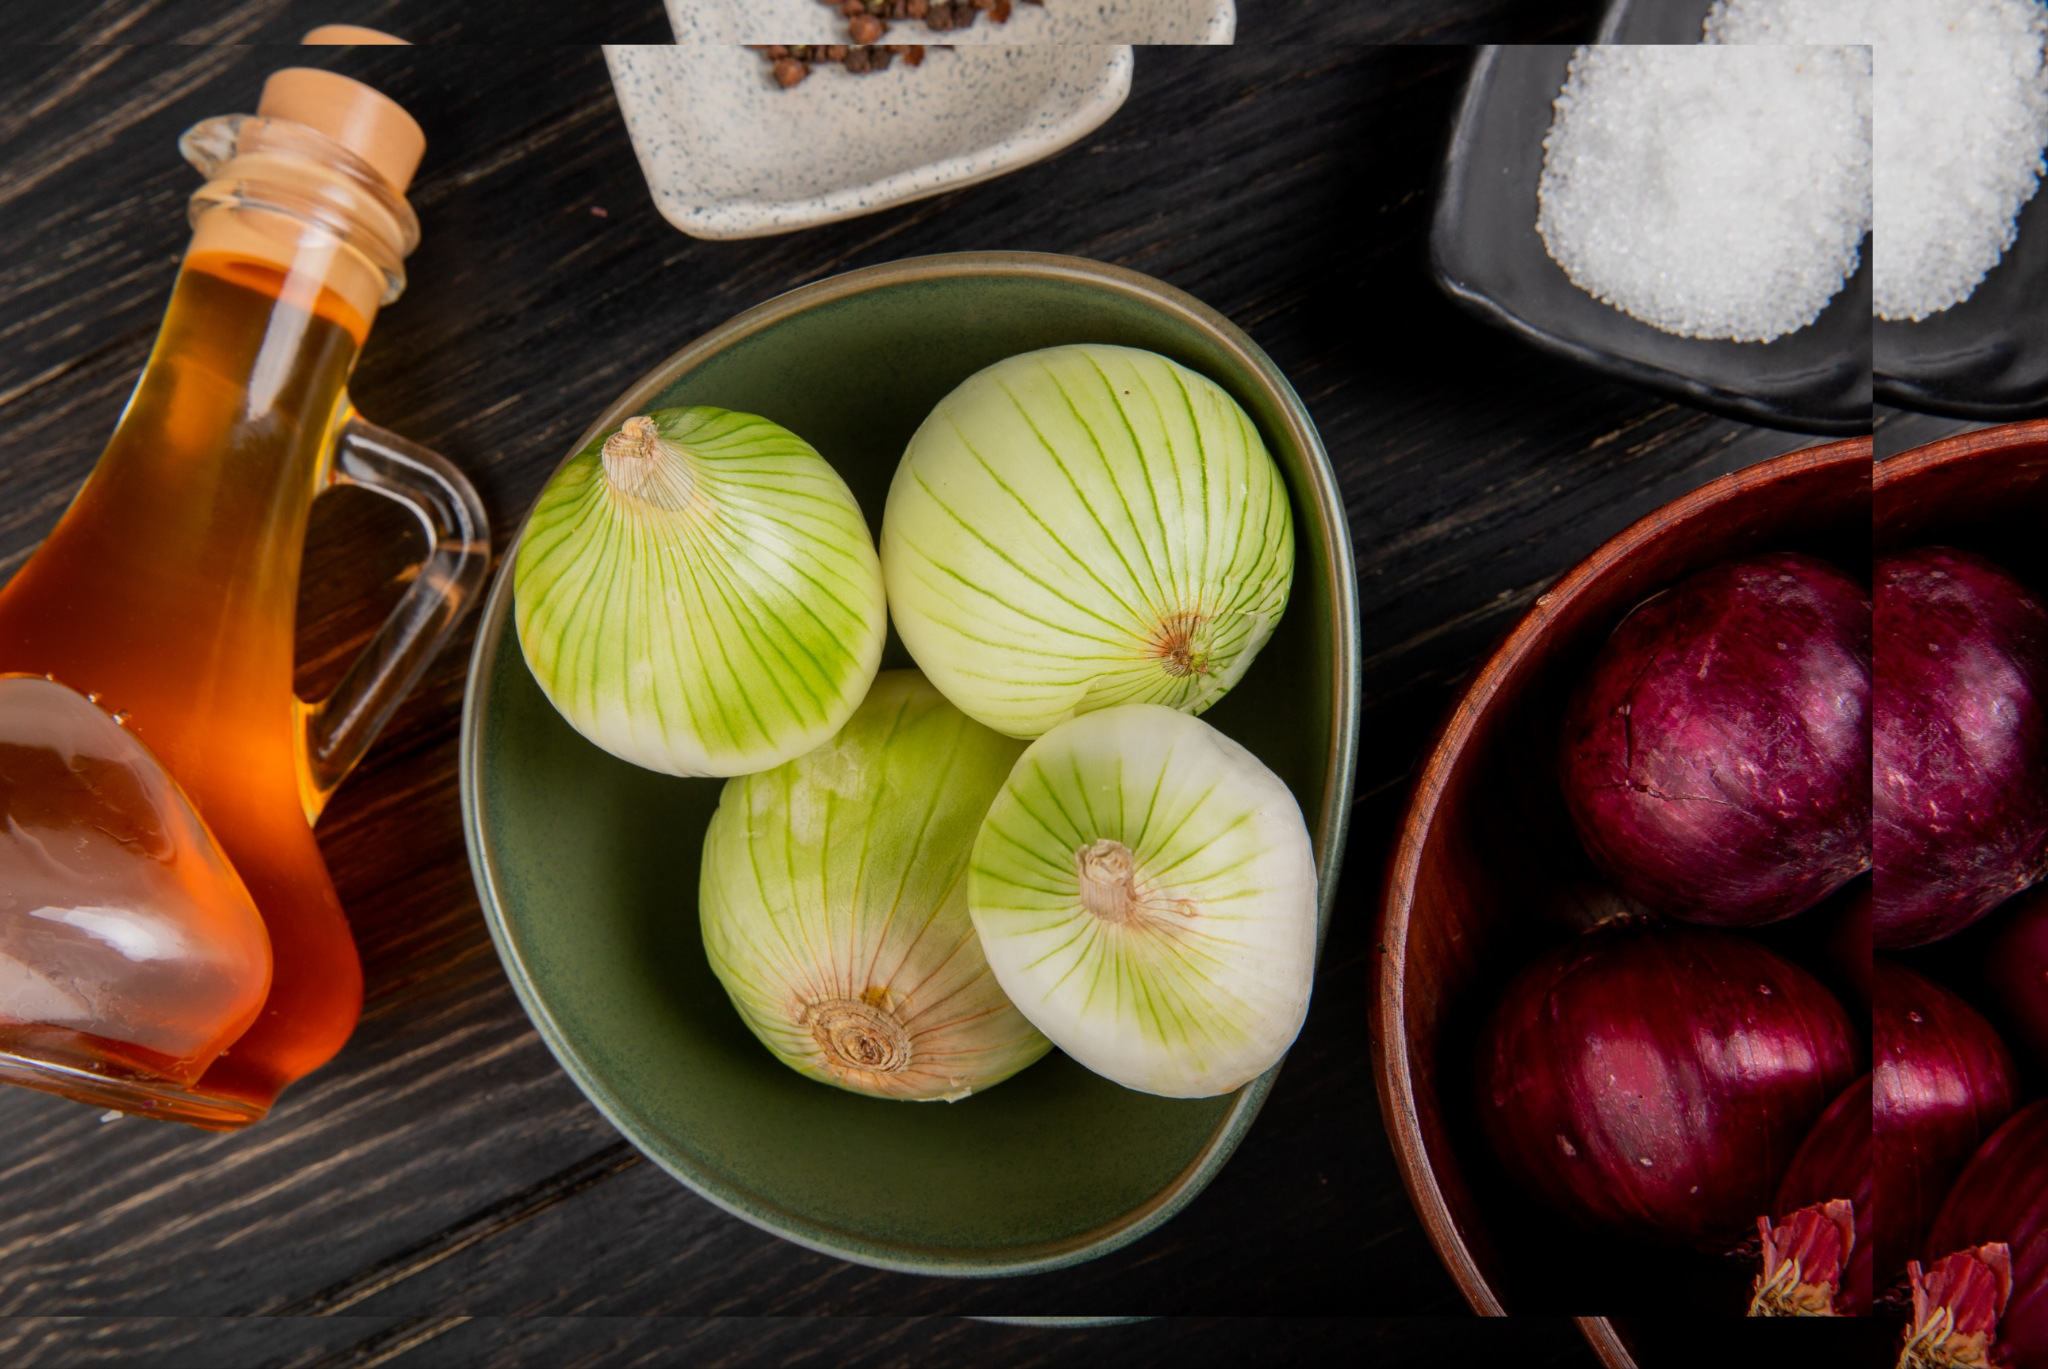 Hair Growth: onion oil can stimulate hair follicles and promote hair growth. This is attributed to compounds like sulfur, which is found in onions and is thought to improve blood circulation to the hair follicles.